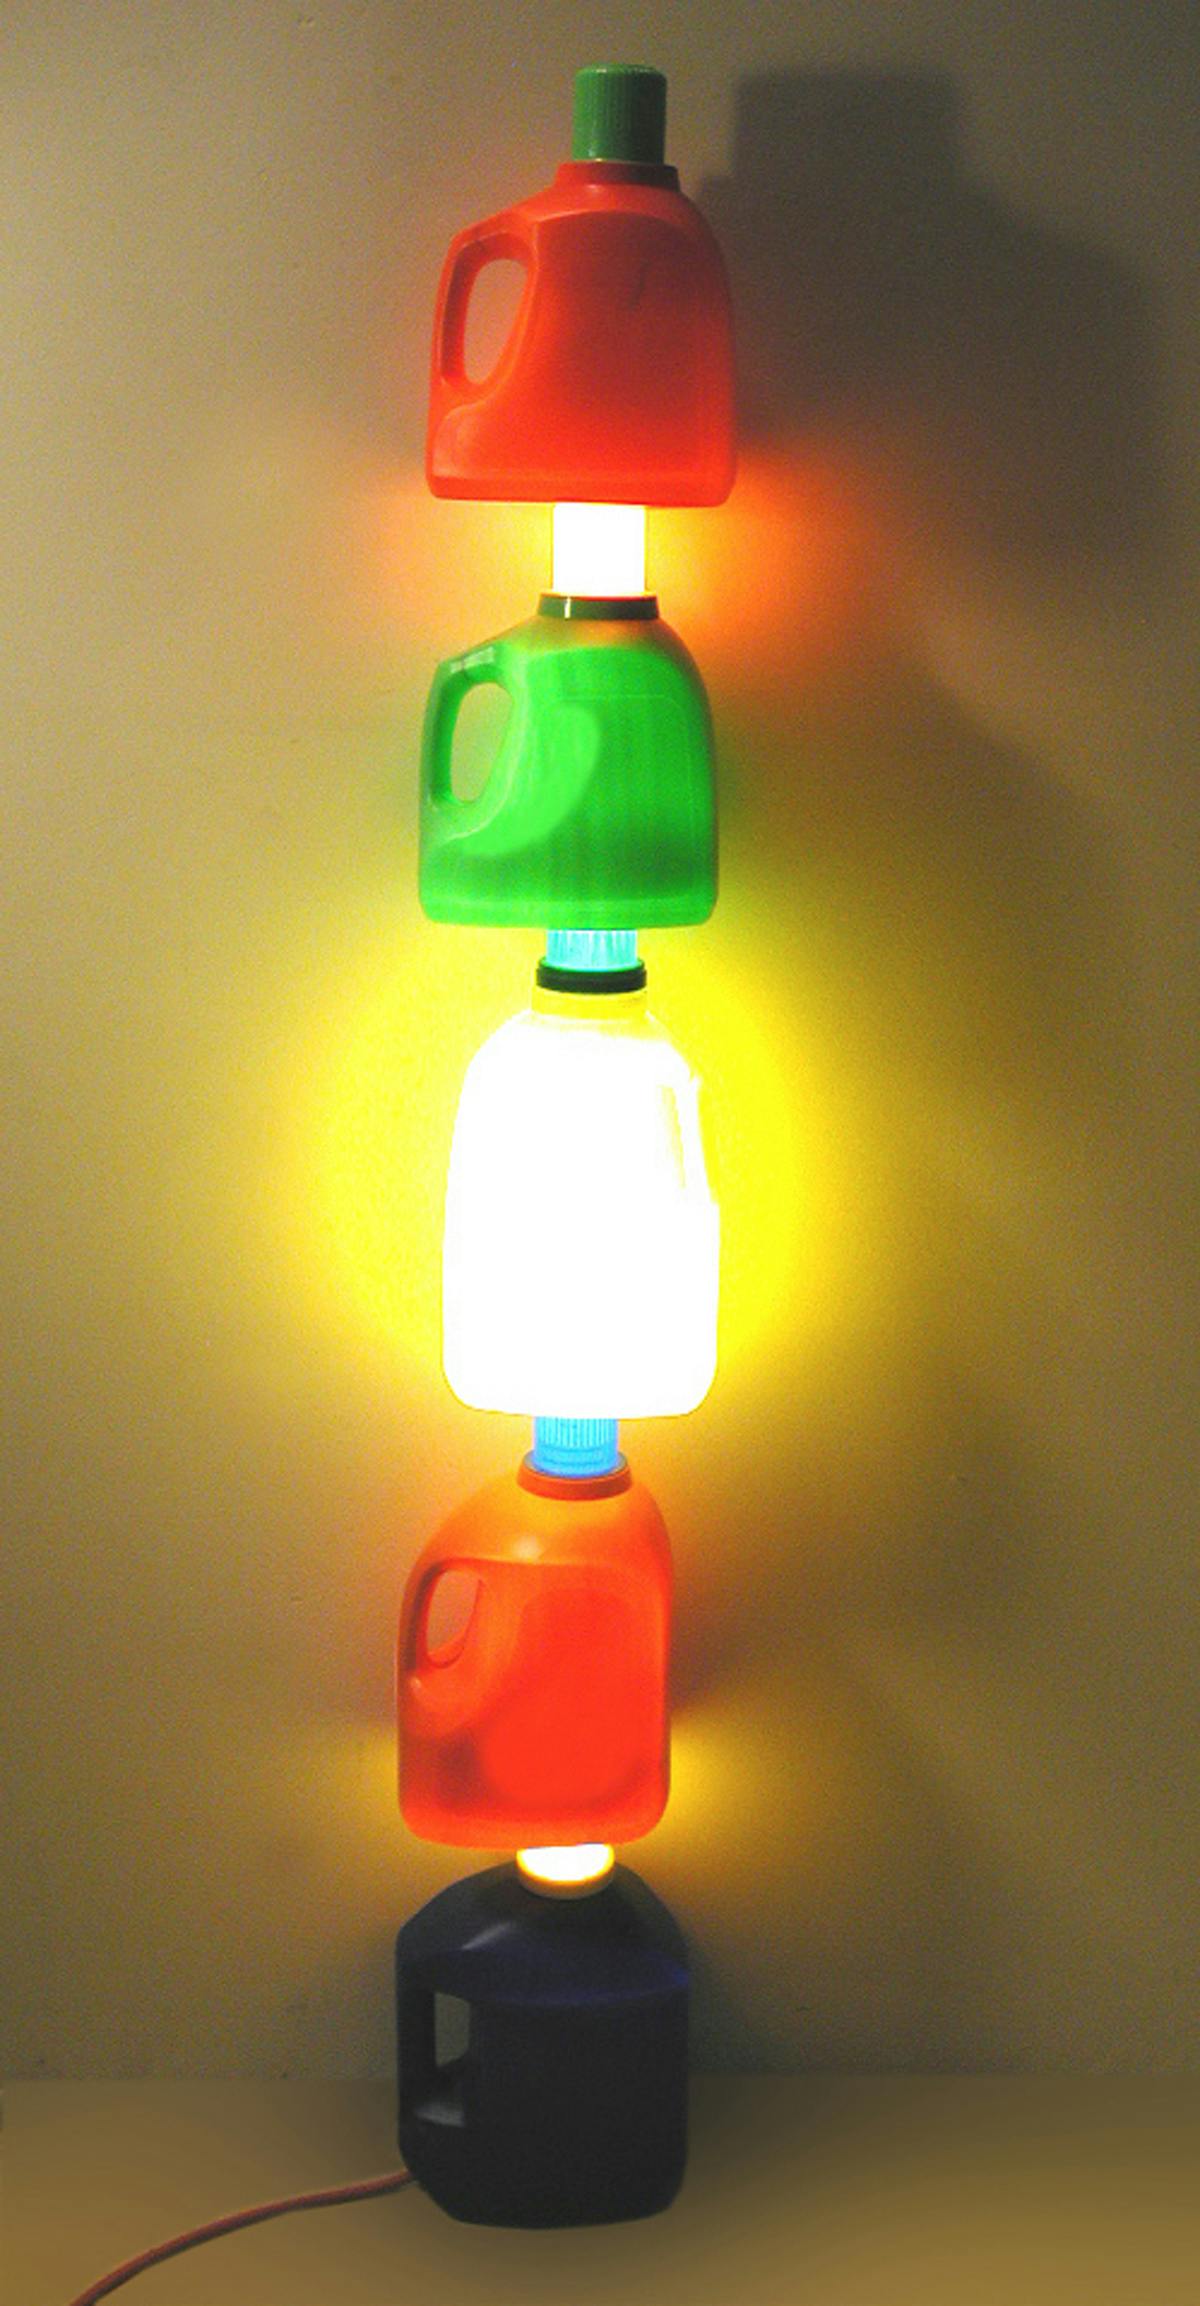 A light made of colored jugs